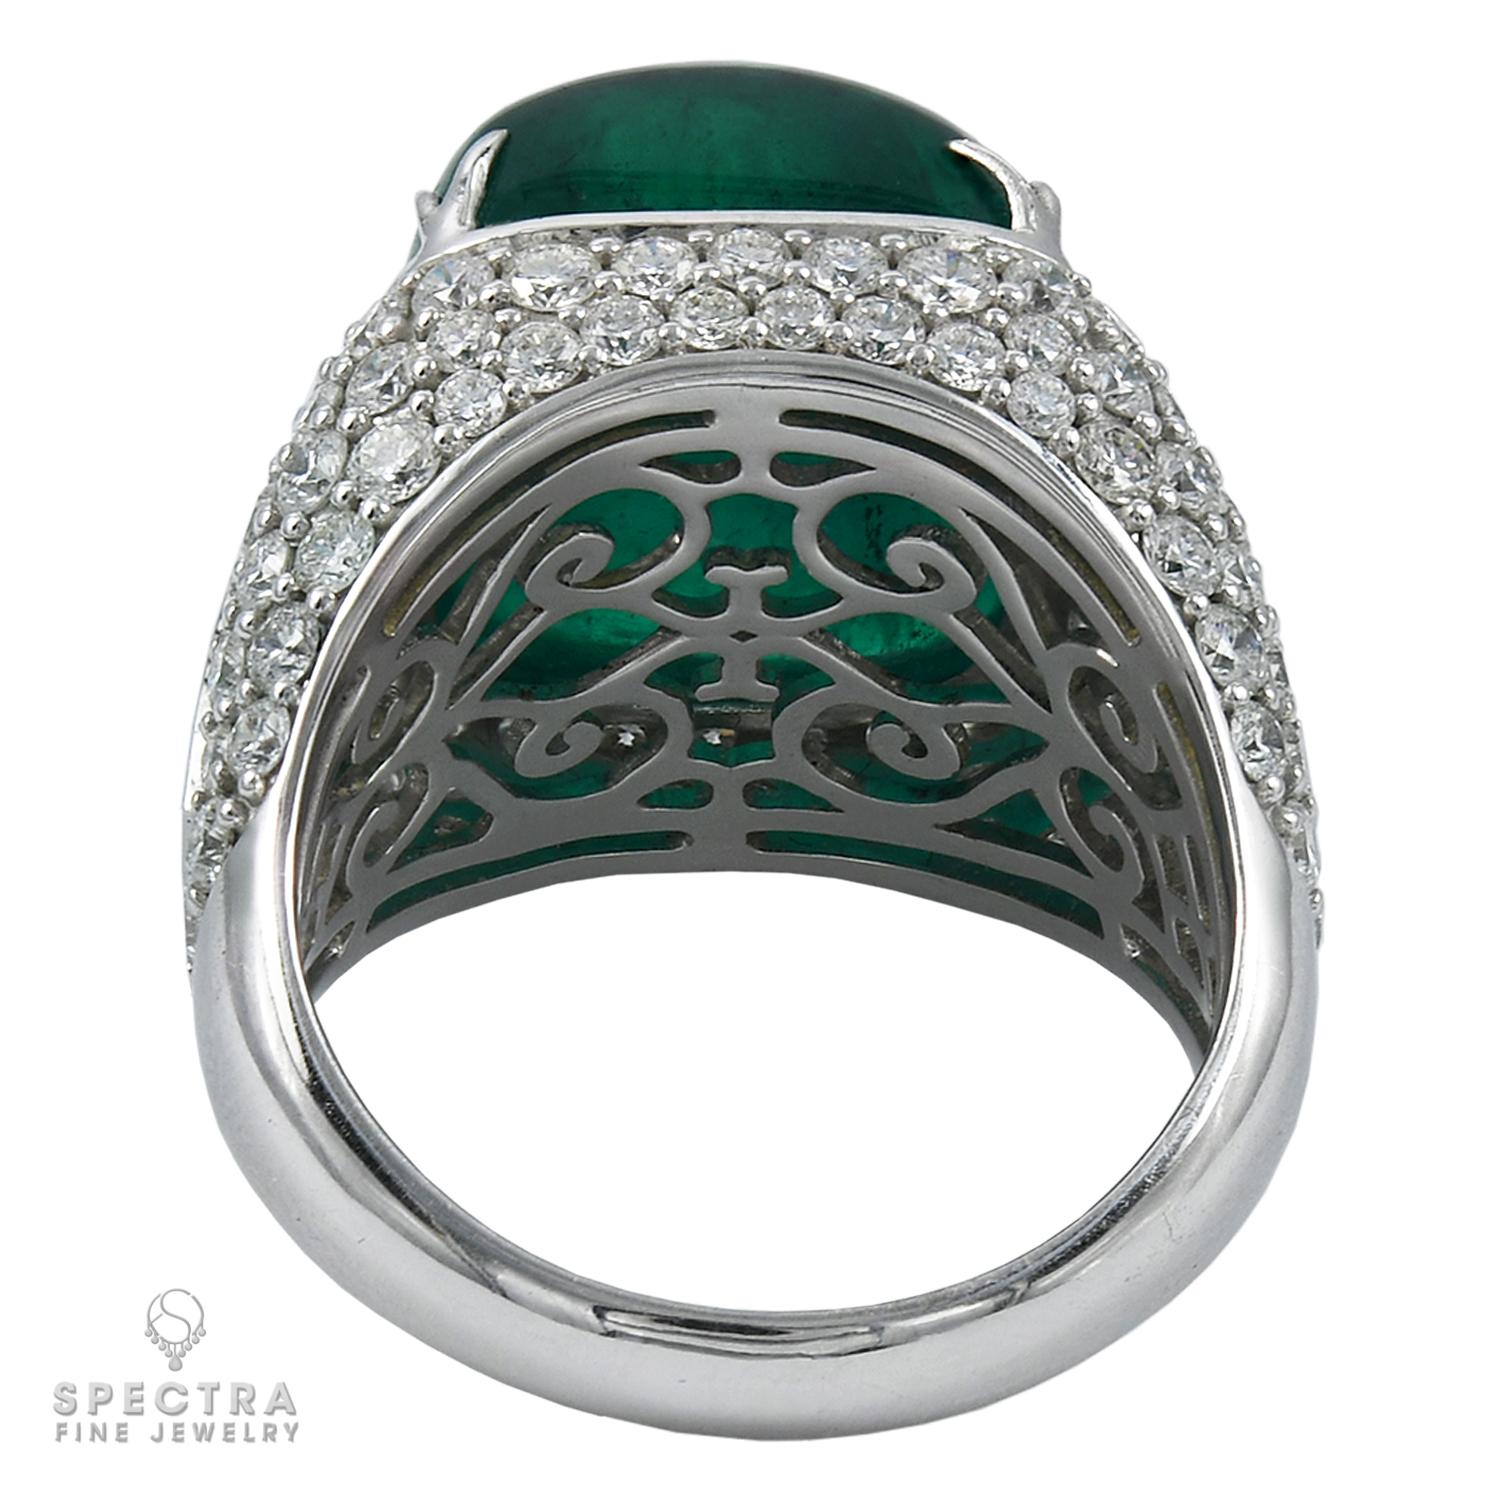 colombian emerald ring for sale